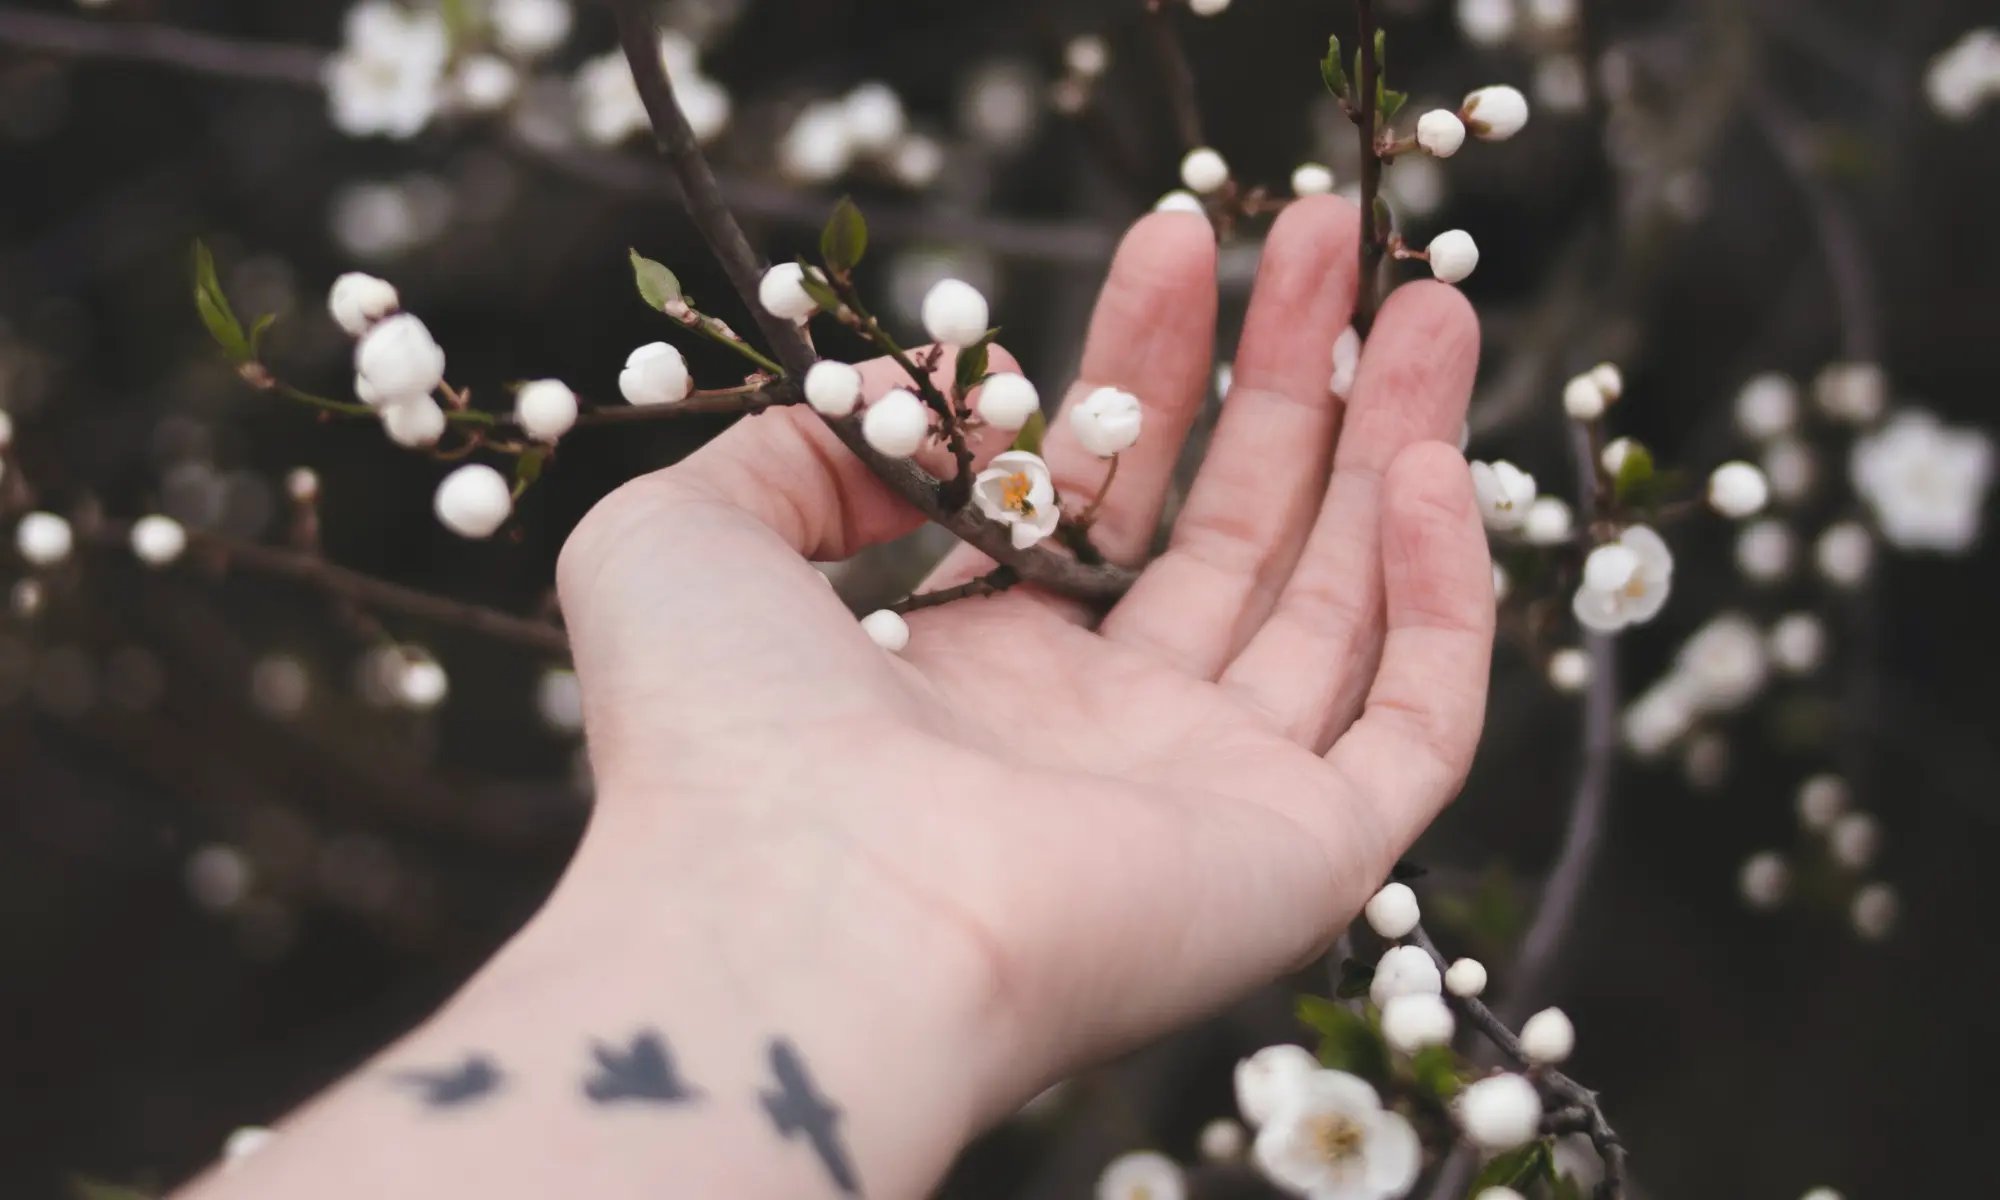 A person touching white flowers with bird tattoos on their wrist.